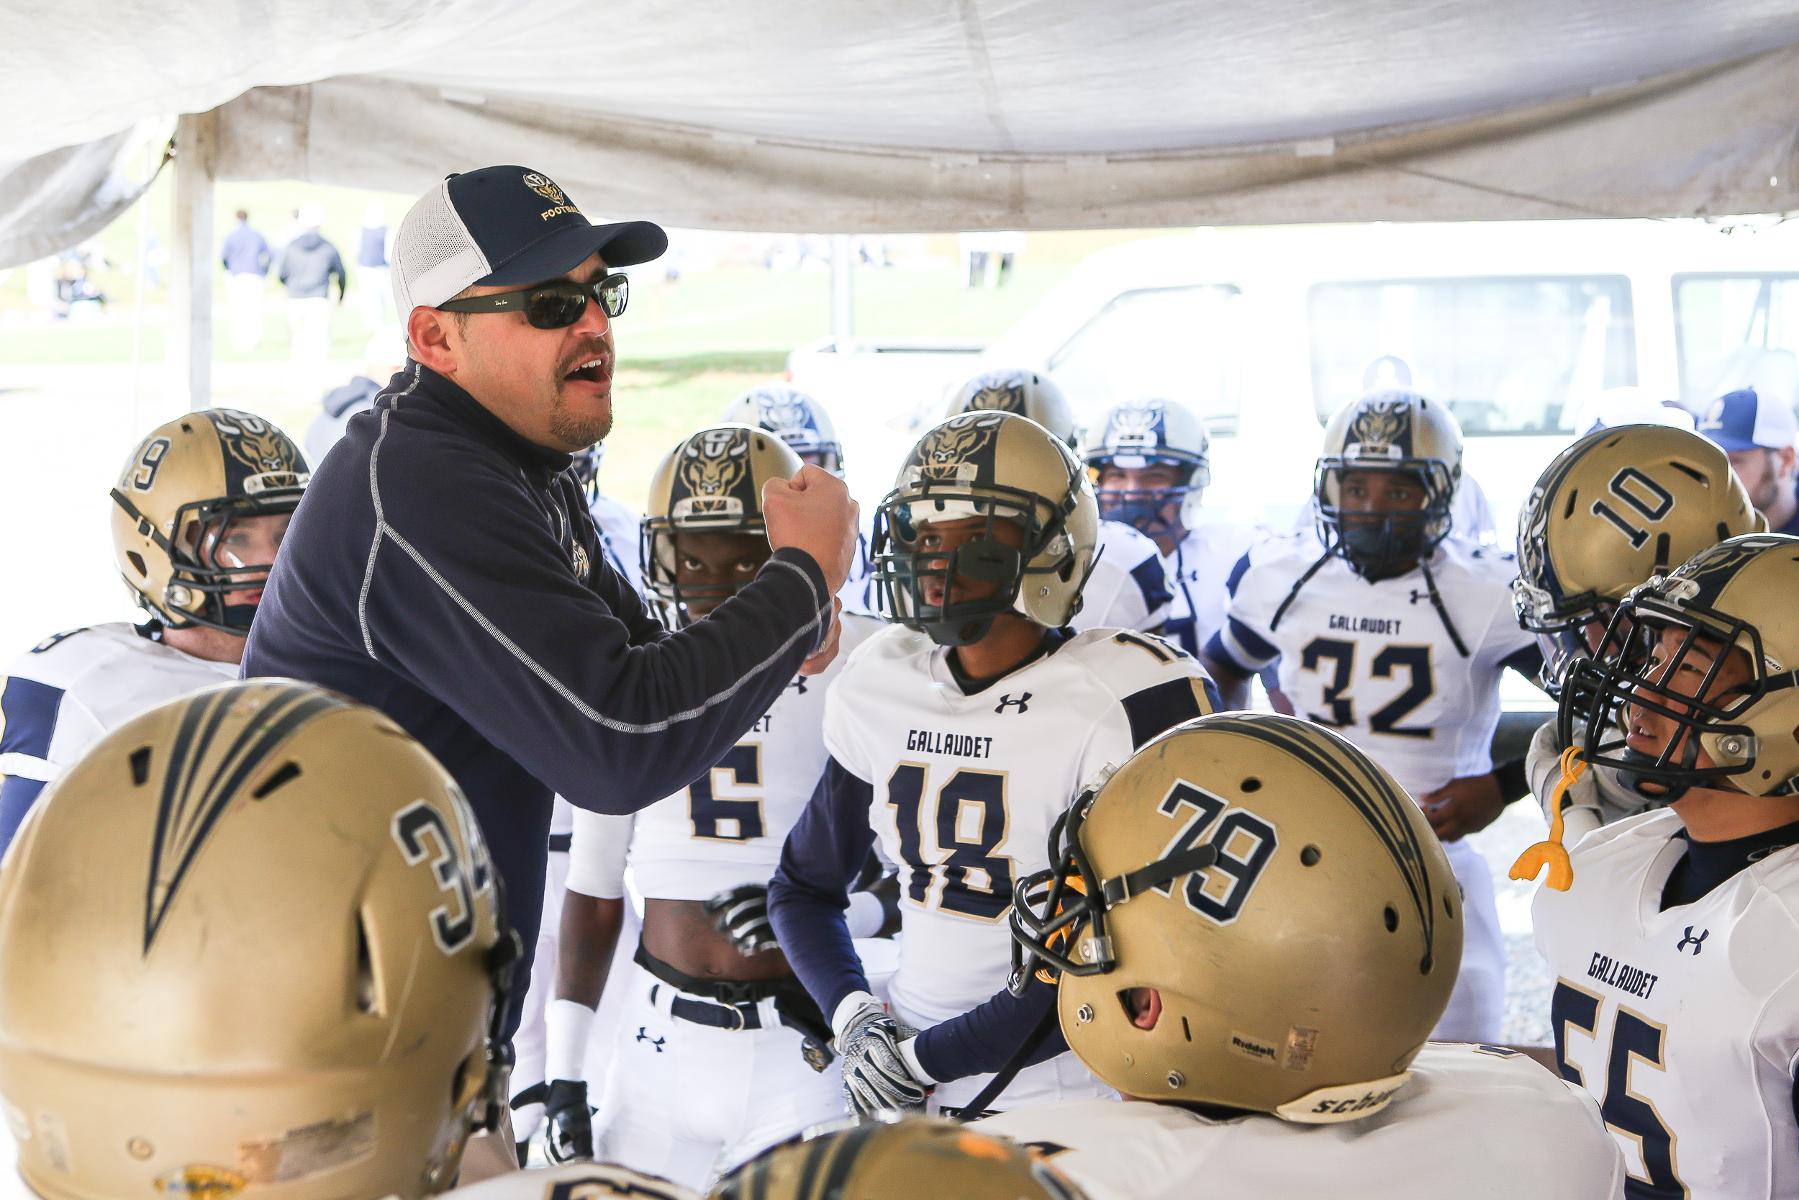 Gallaudet Rebuilding Project Ready to 'Rise Up' in 2016